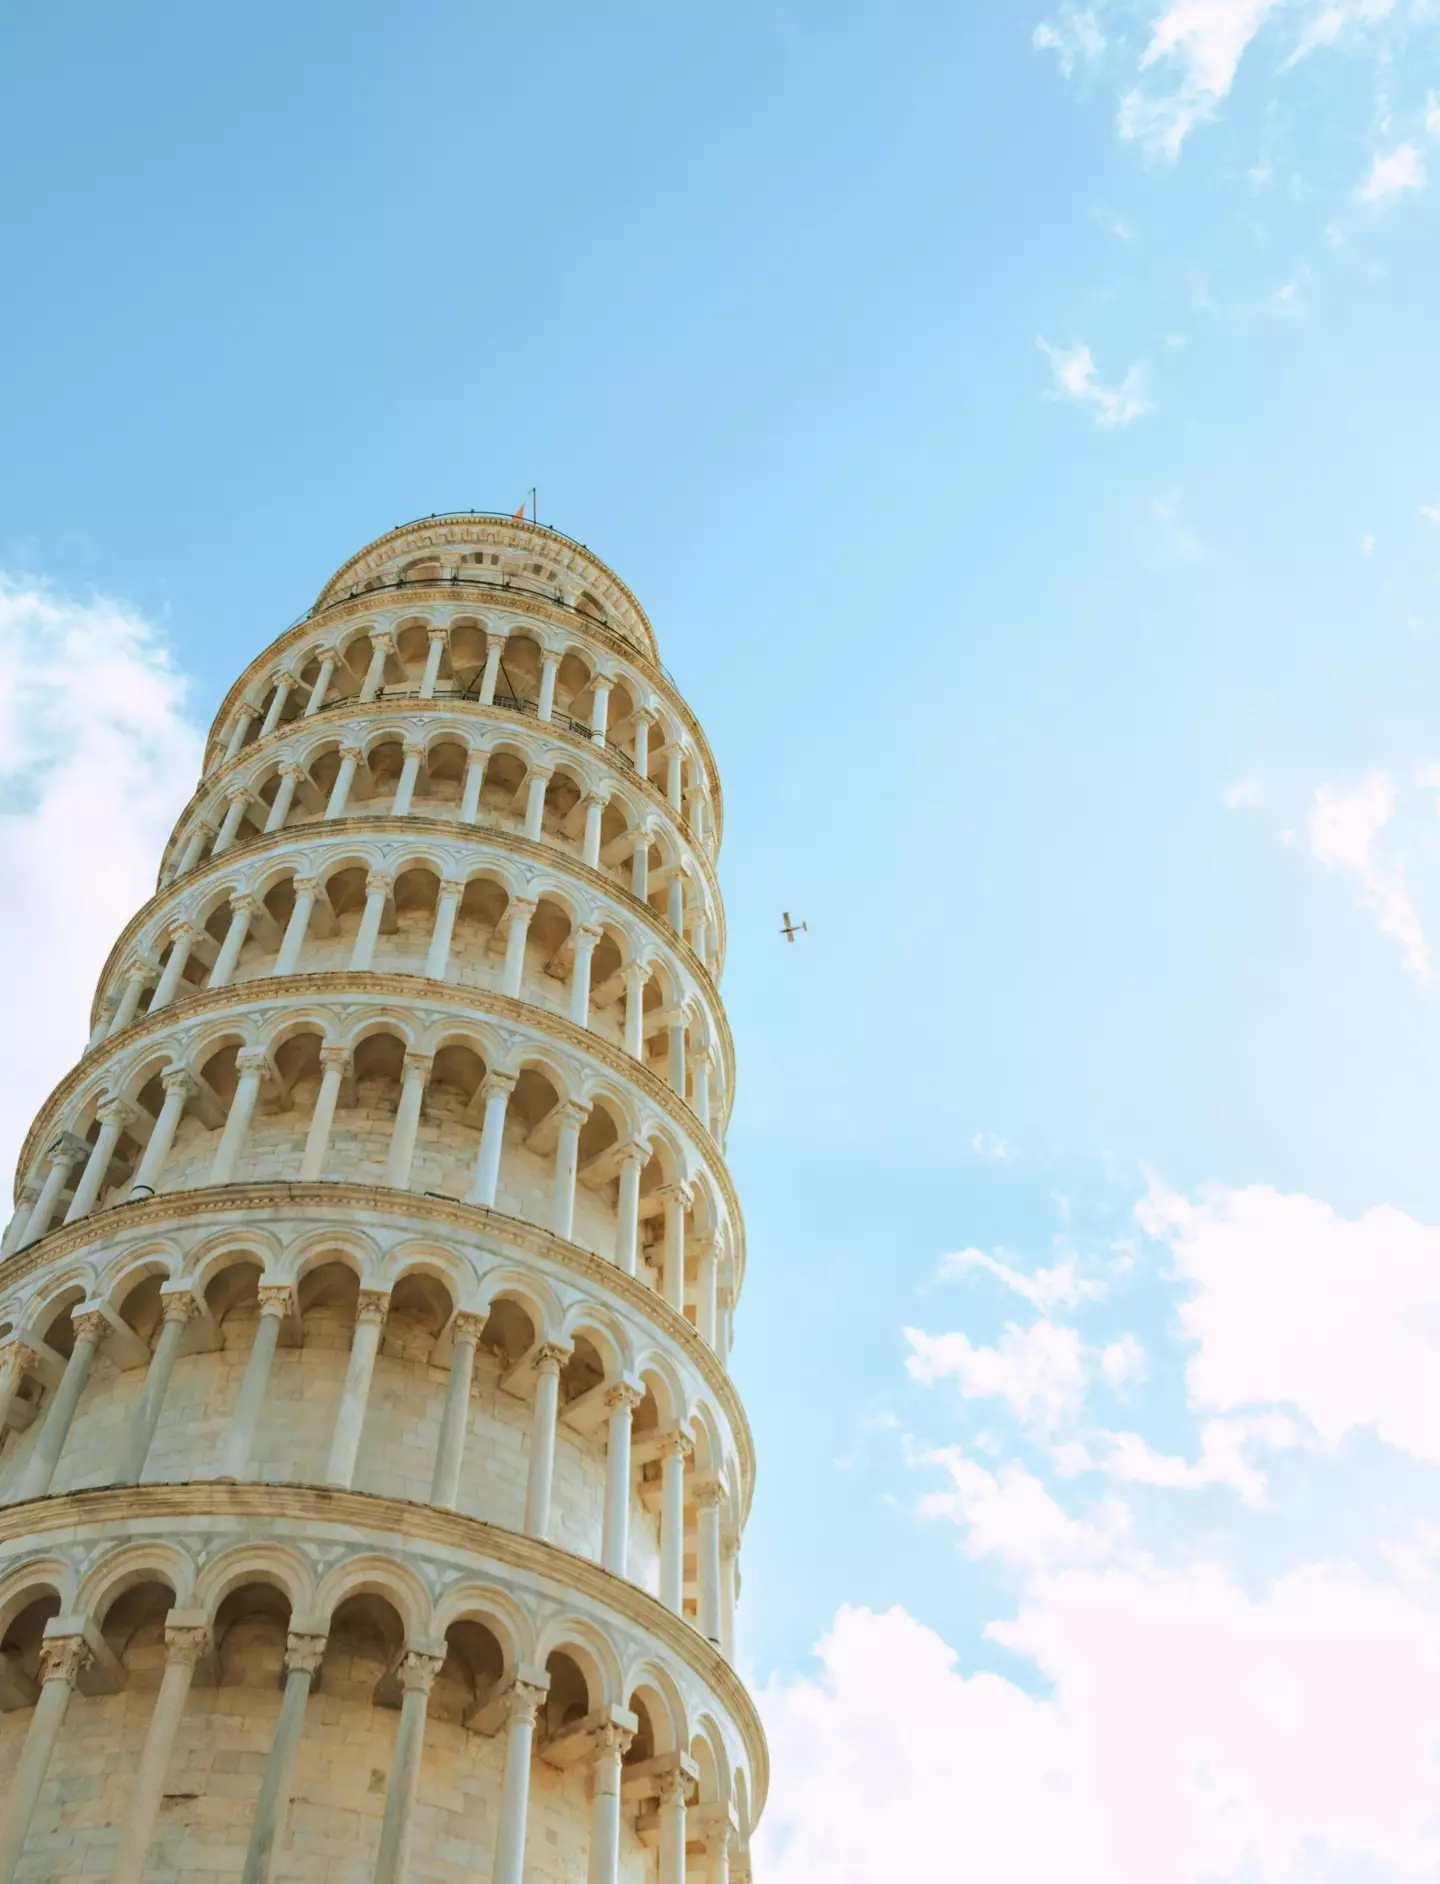 You can nab one-way flights to Pisa in Italy for just £12.99.